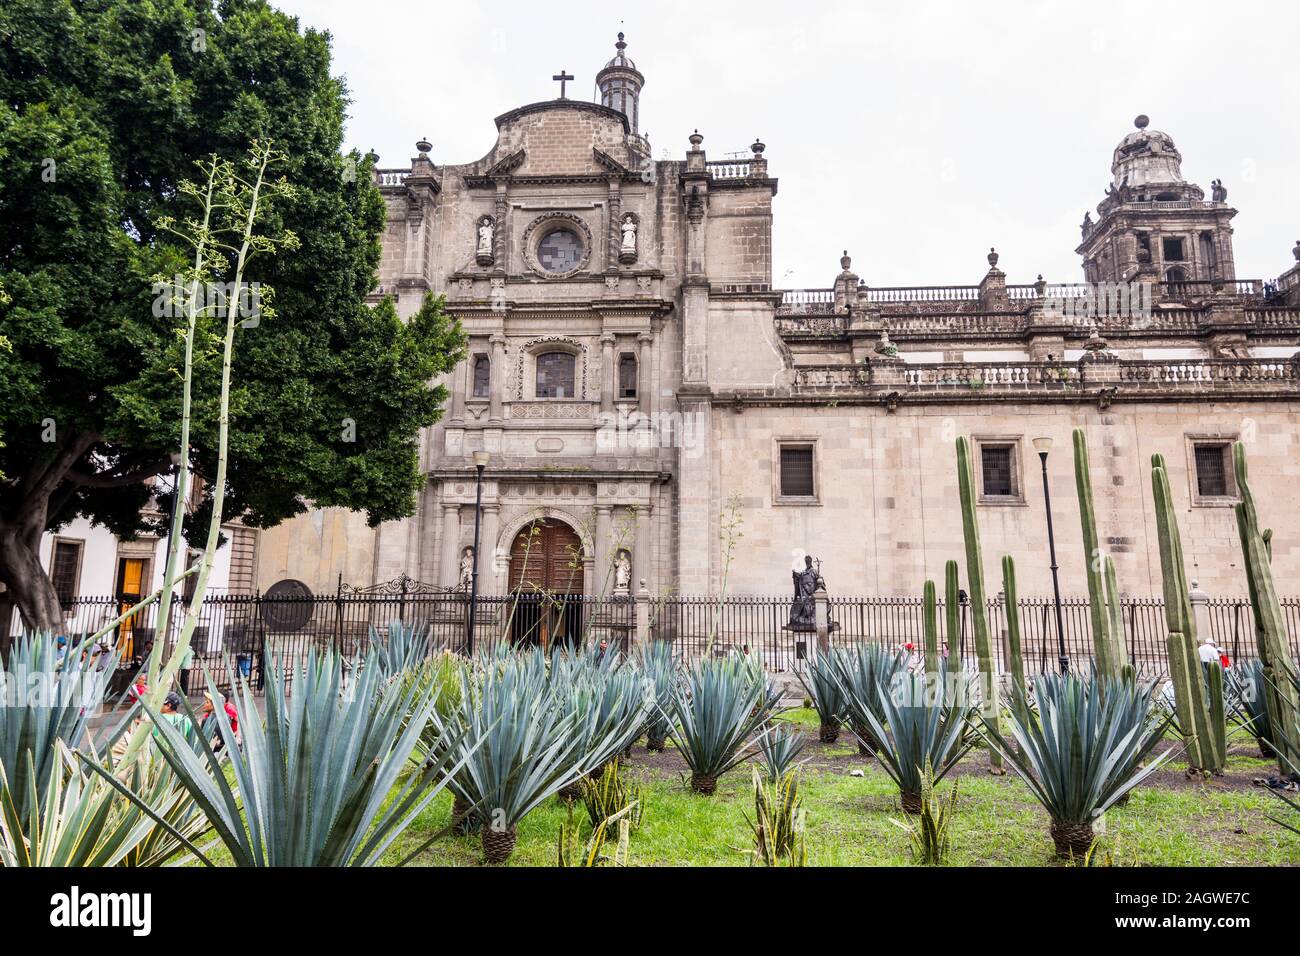 Sisal plants, Agave sisalana growing in the field next to Mexico City Metropolitan Cathedral, and  main square in Mexico City, La Plaza de la Constitu Stock Photo